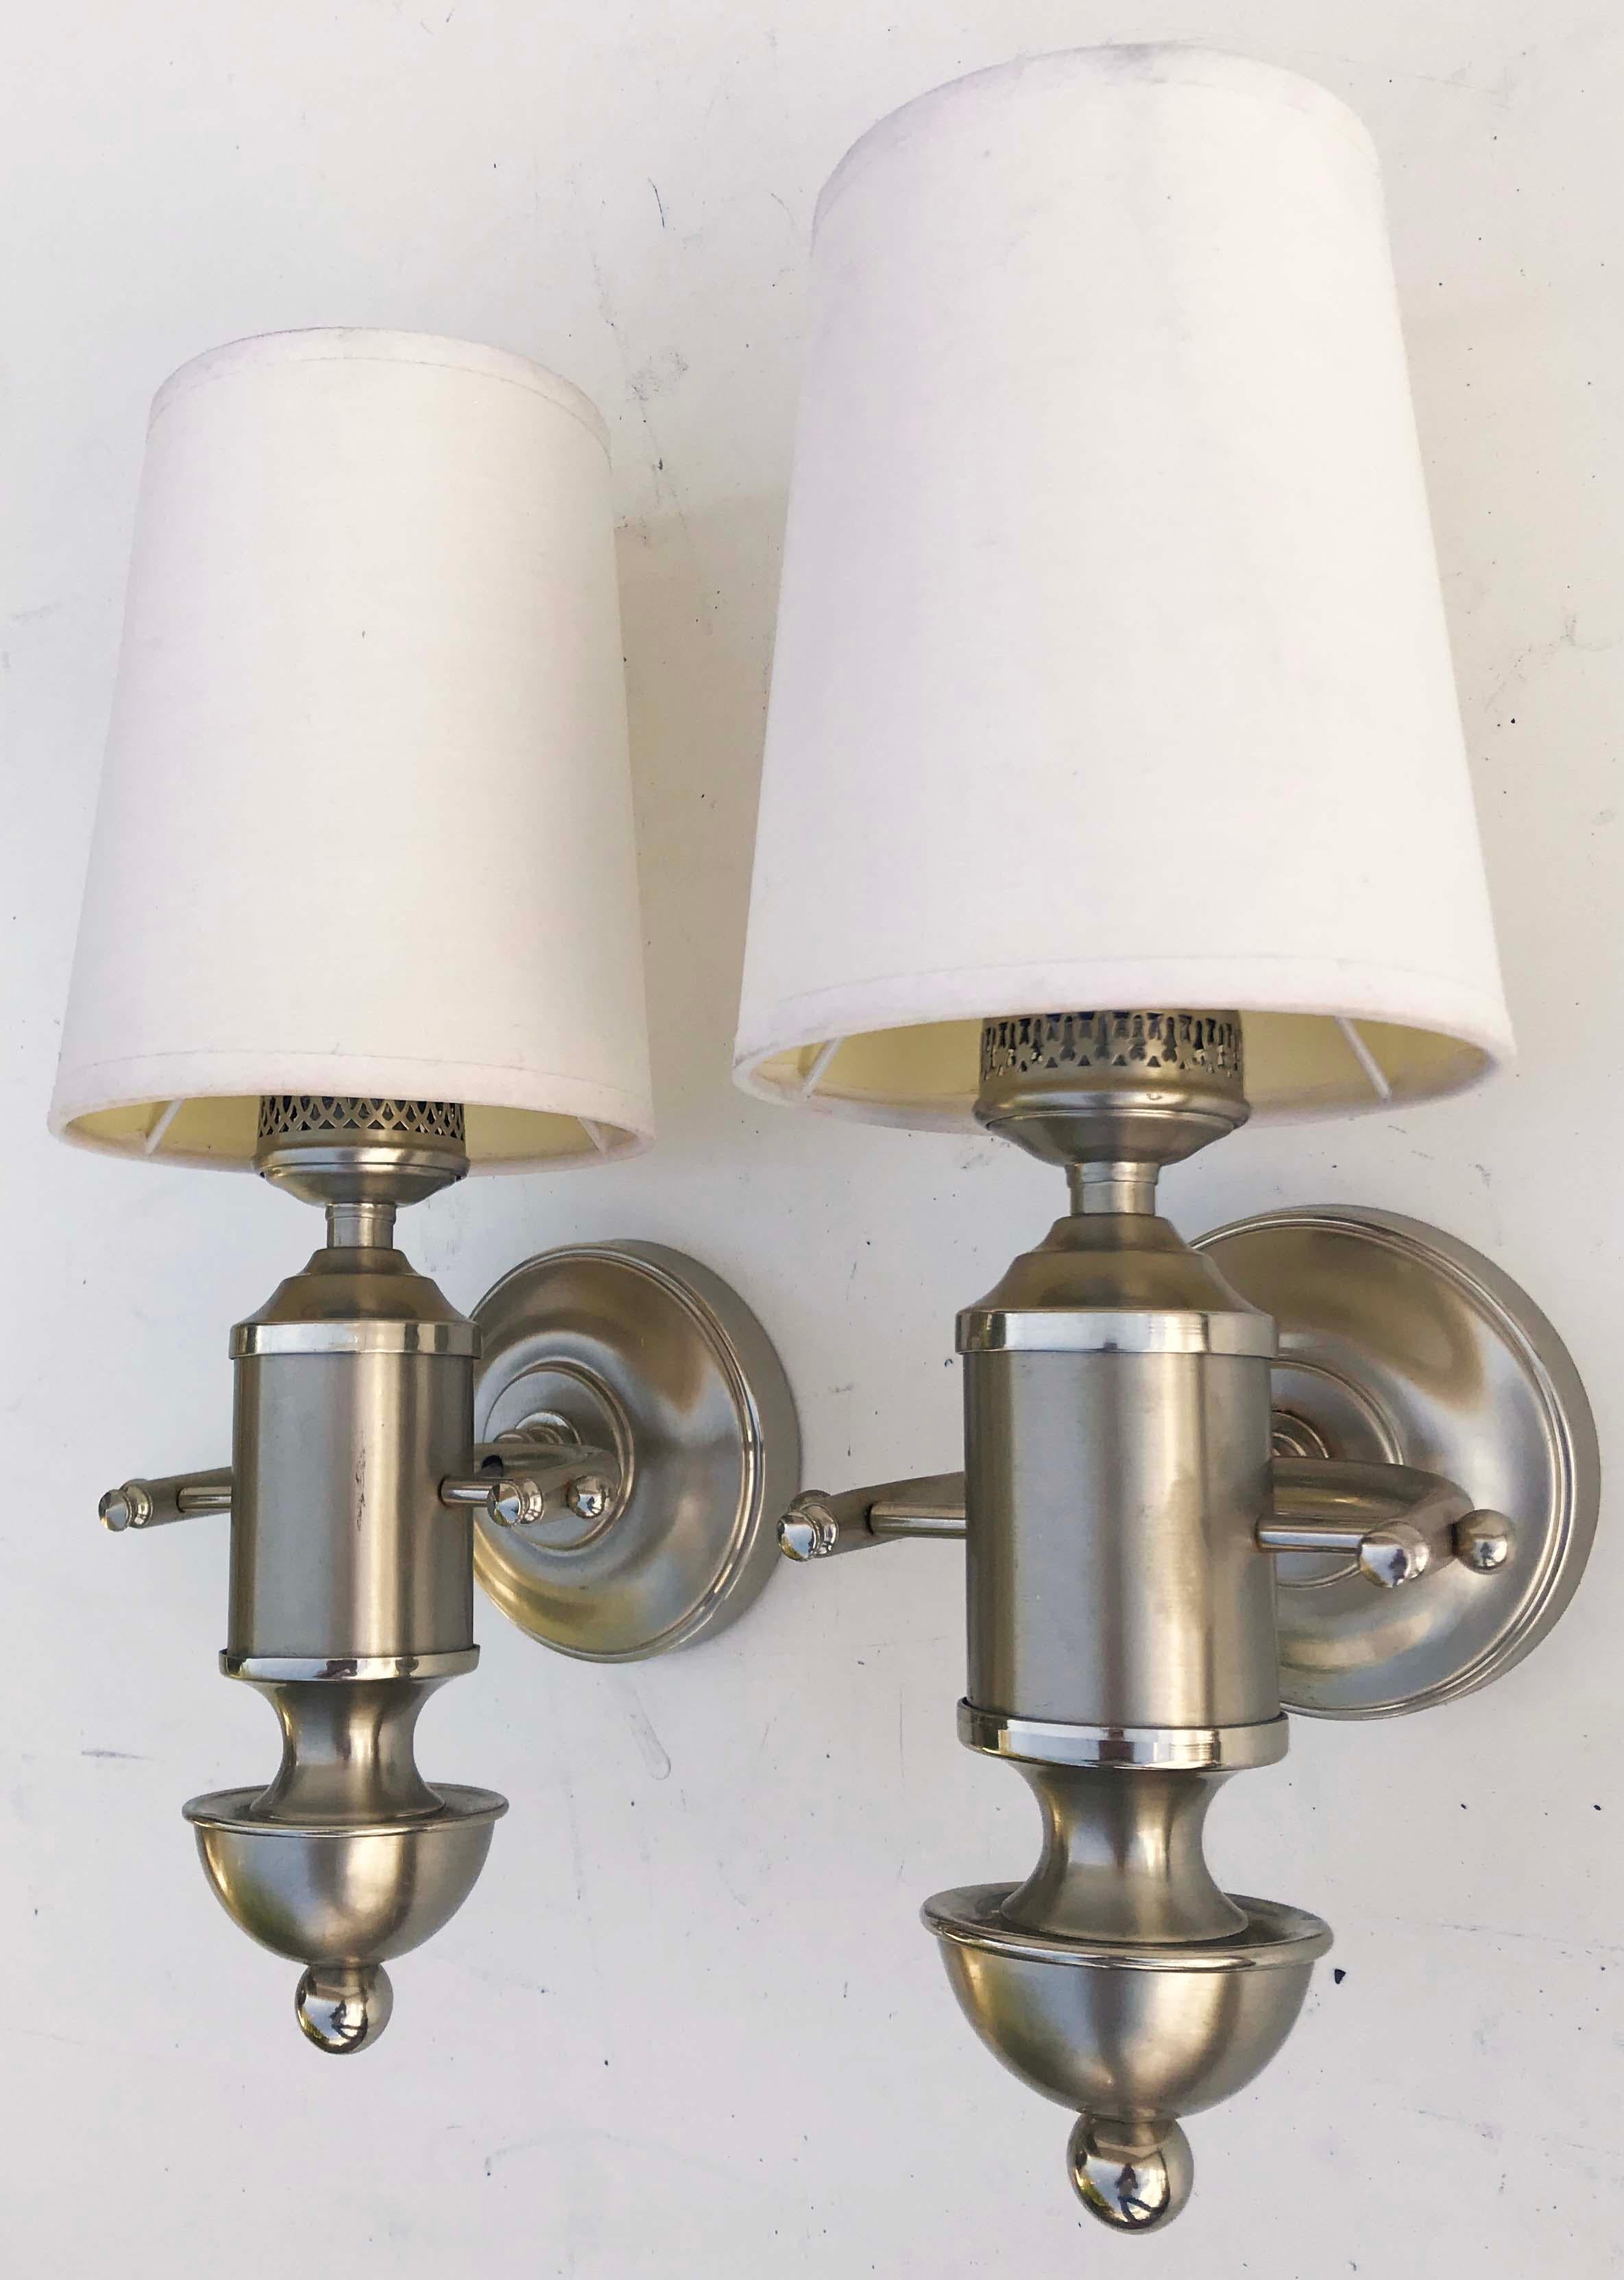 Superb pair of signed Maison Charles Yacht sconces, nickel-plated brass.
Top quality French sconces.
US rewired and in working condition
1 light, 25 watts max bulb.
Back plate: 4